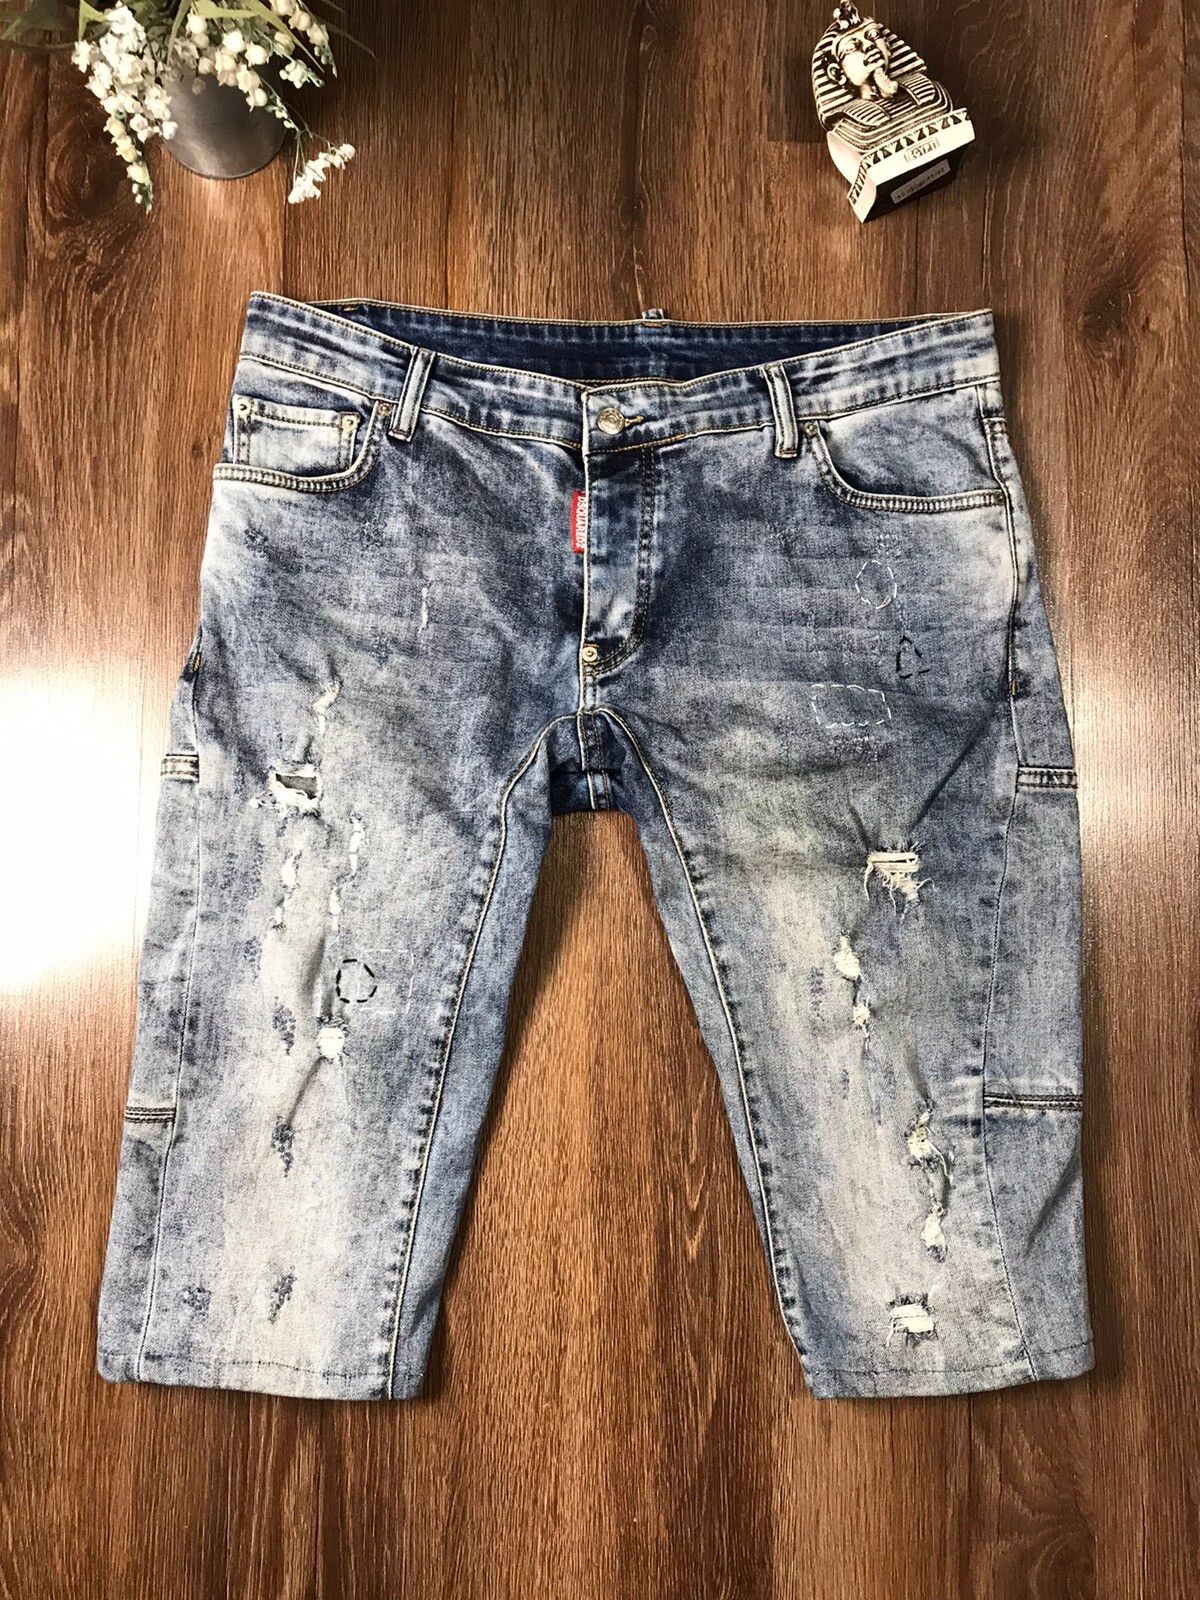 Dsquared2 Dsquared2 Big Dean's brother jeans | Grailed